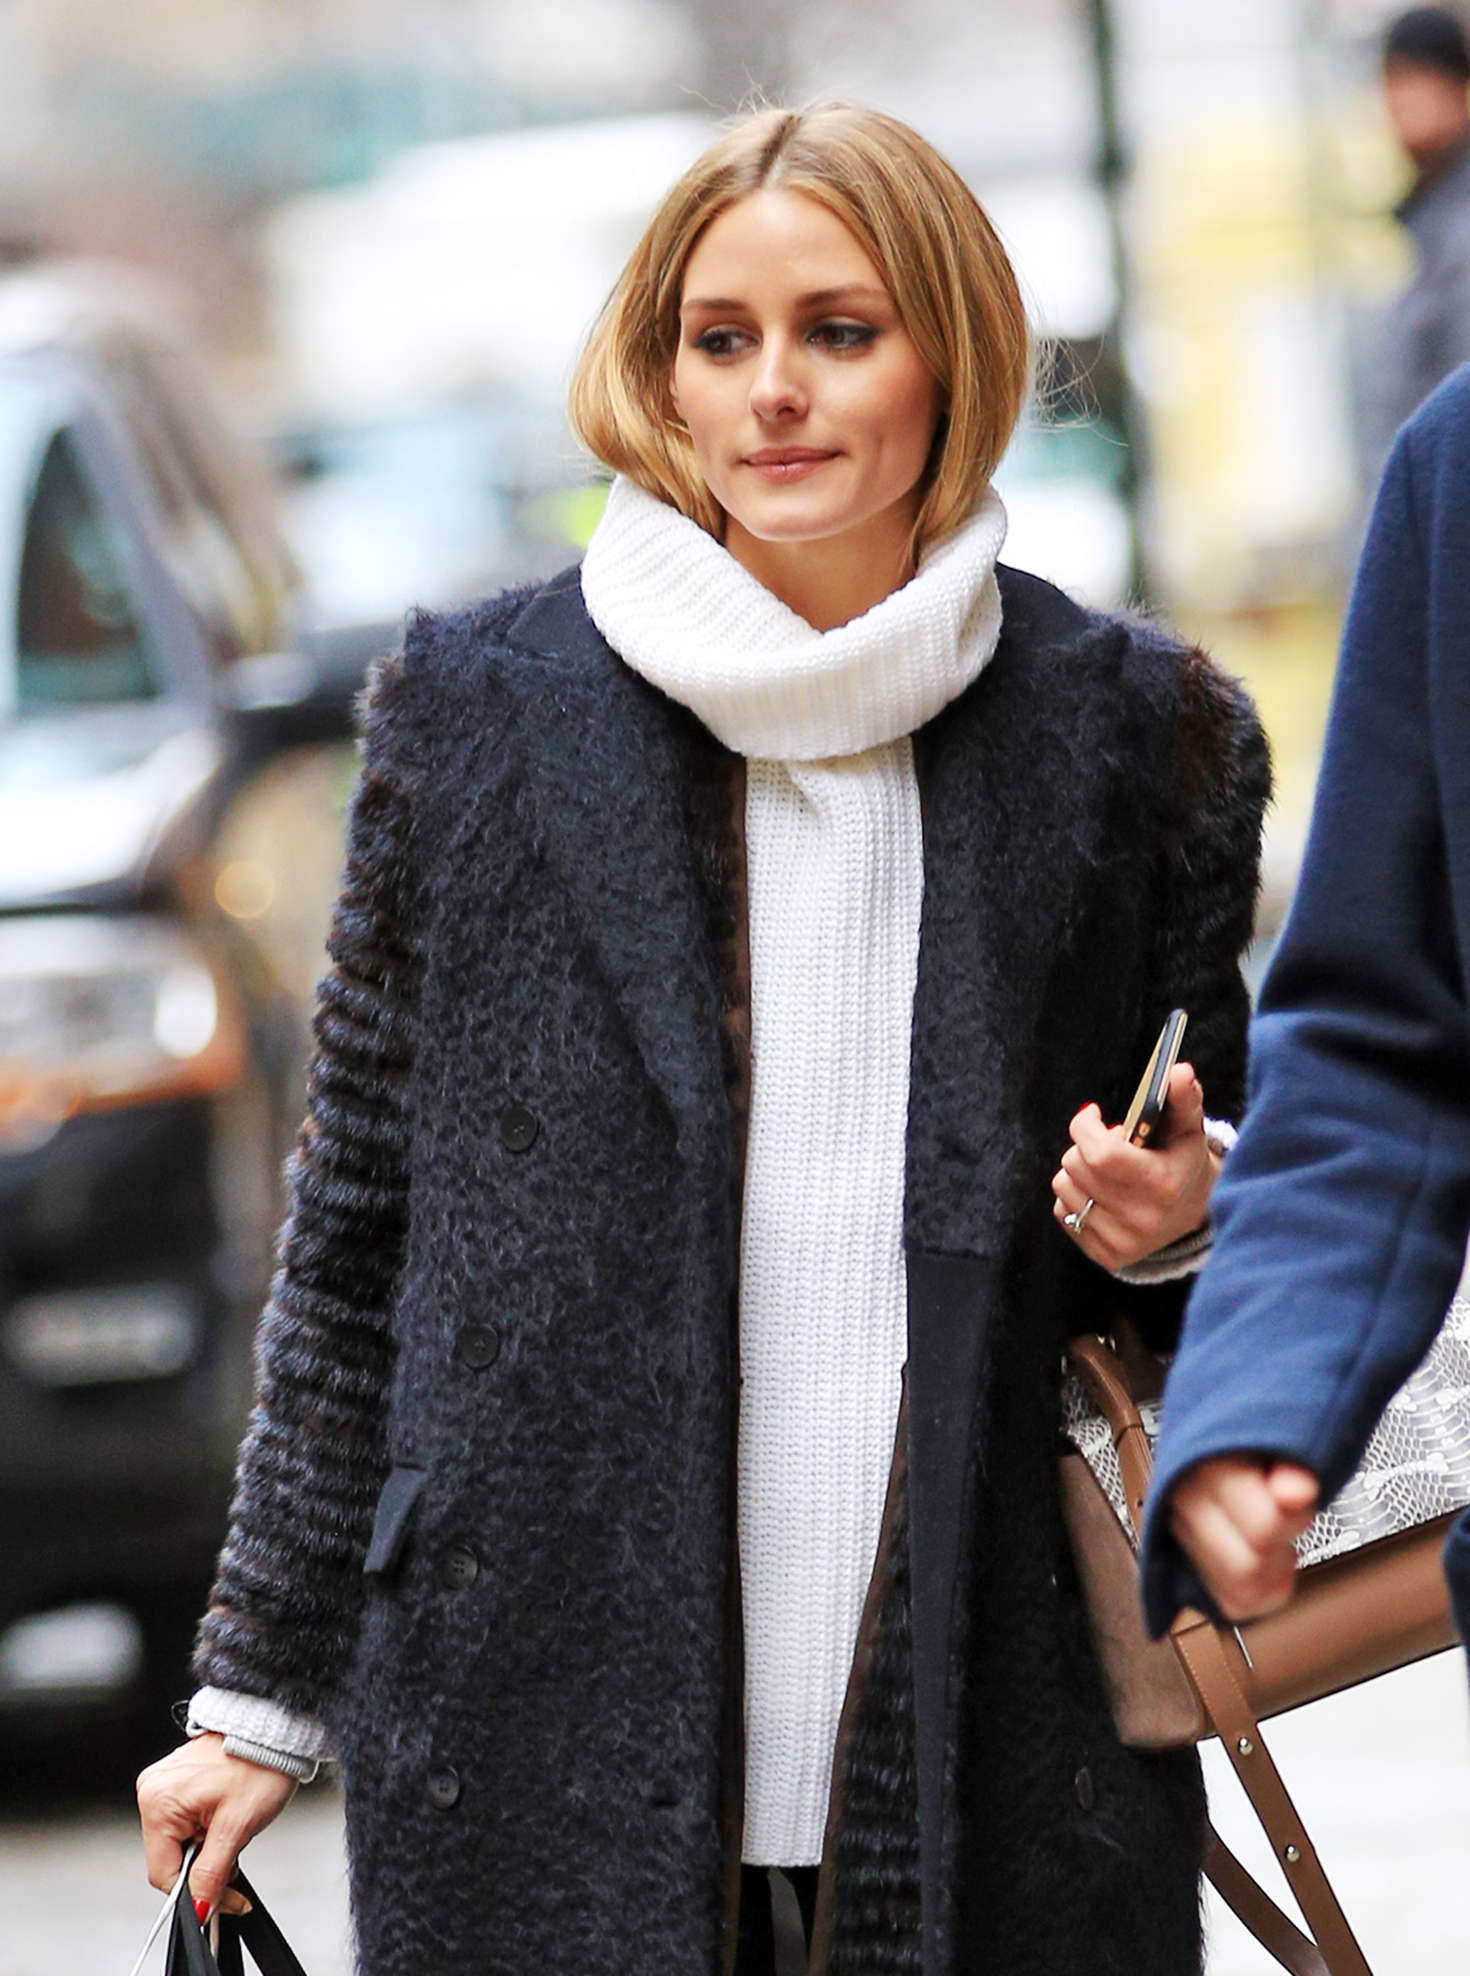 Olivia Palermo out in NYC | GotCeleb